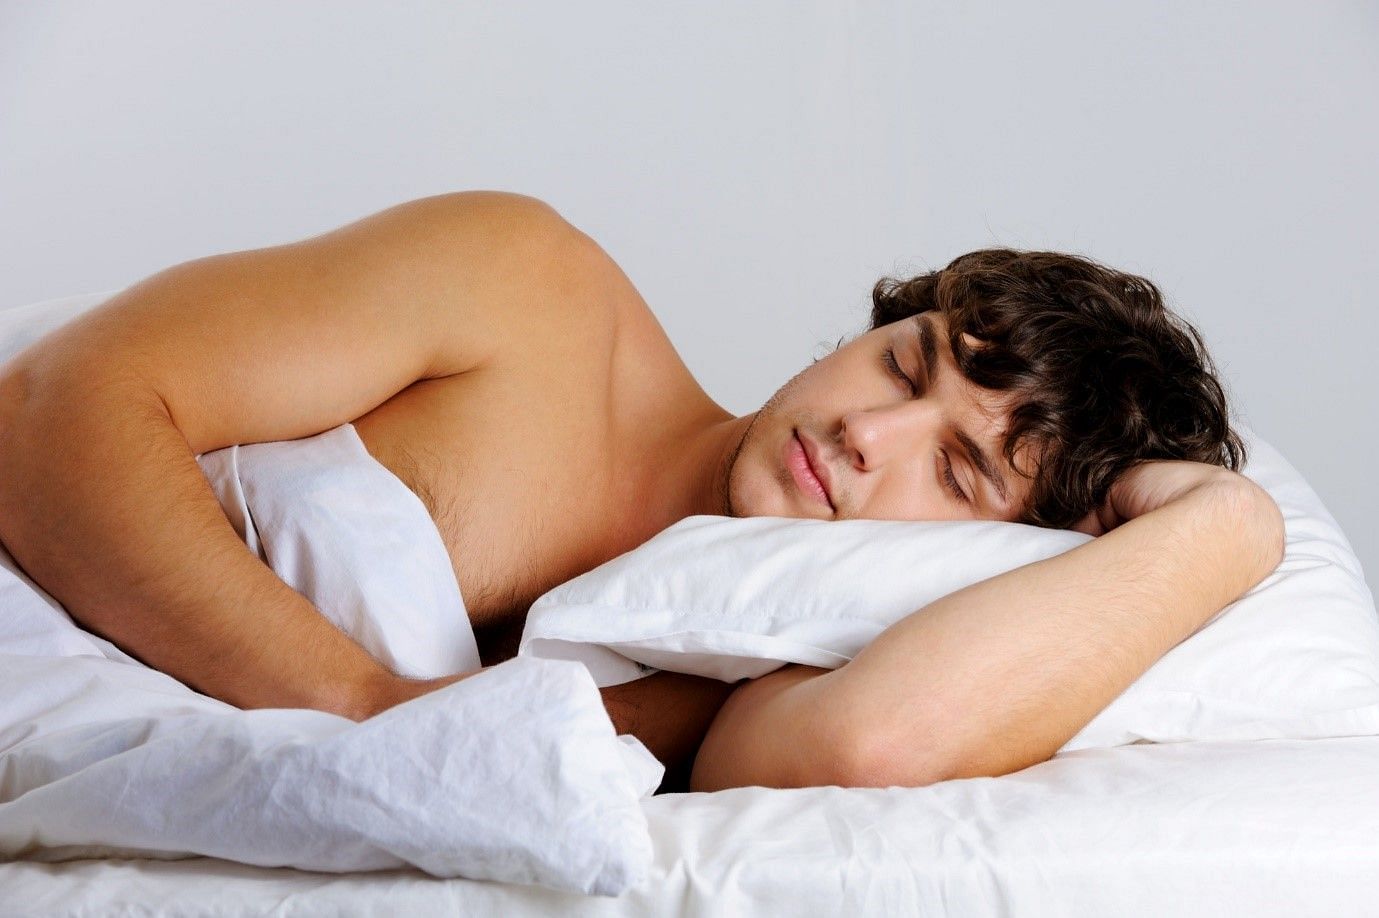 Sleeping without clothes is scientifically proven to be better (Image by Valuavitaly on Freepik)